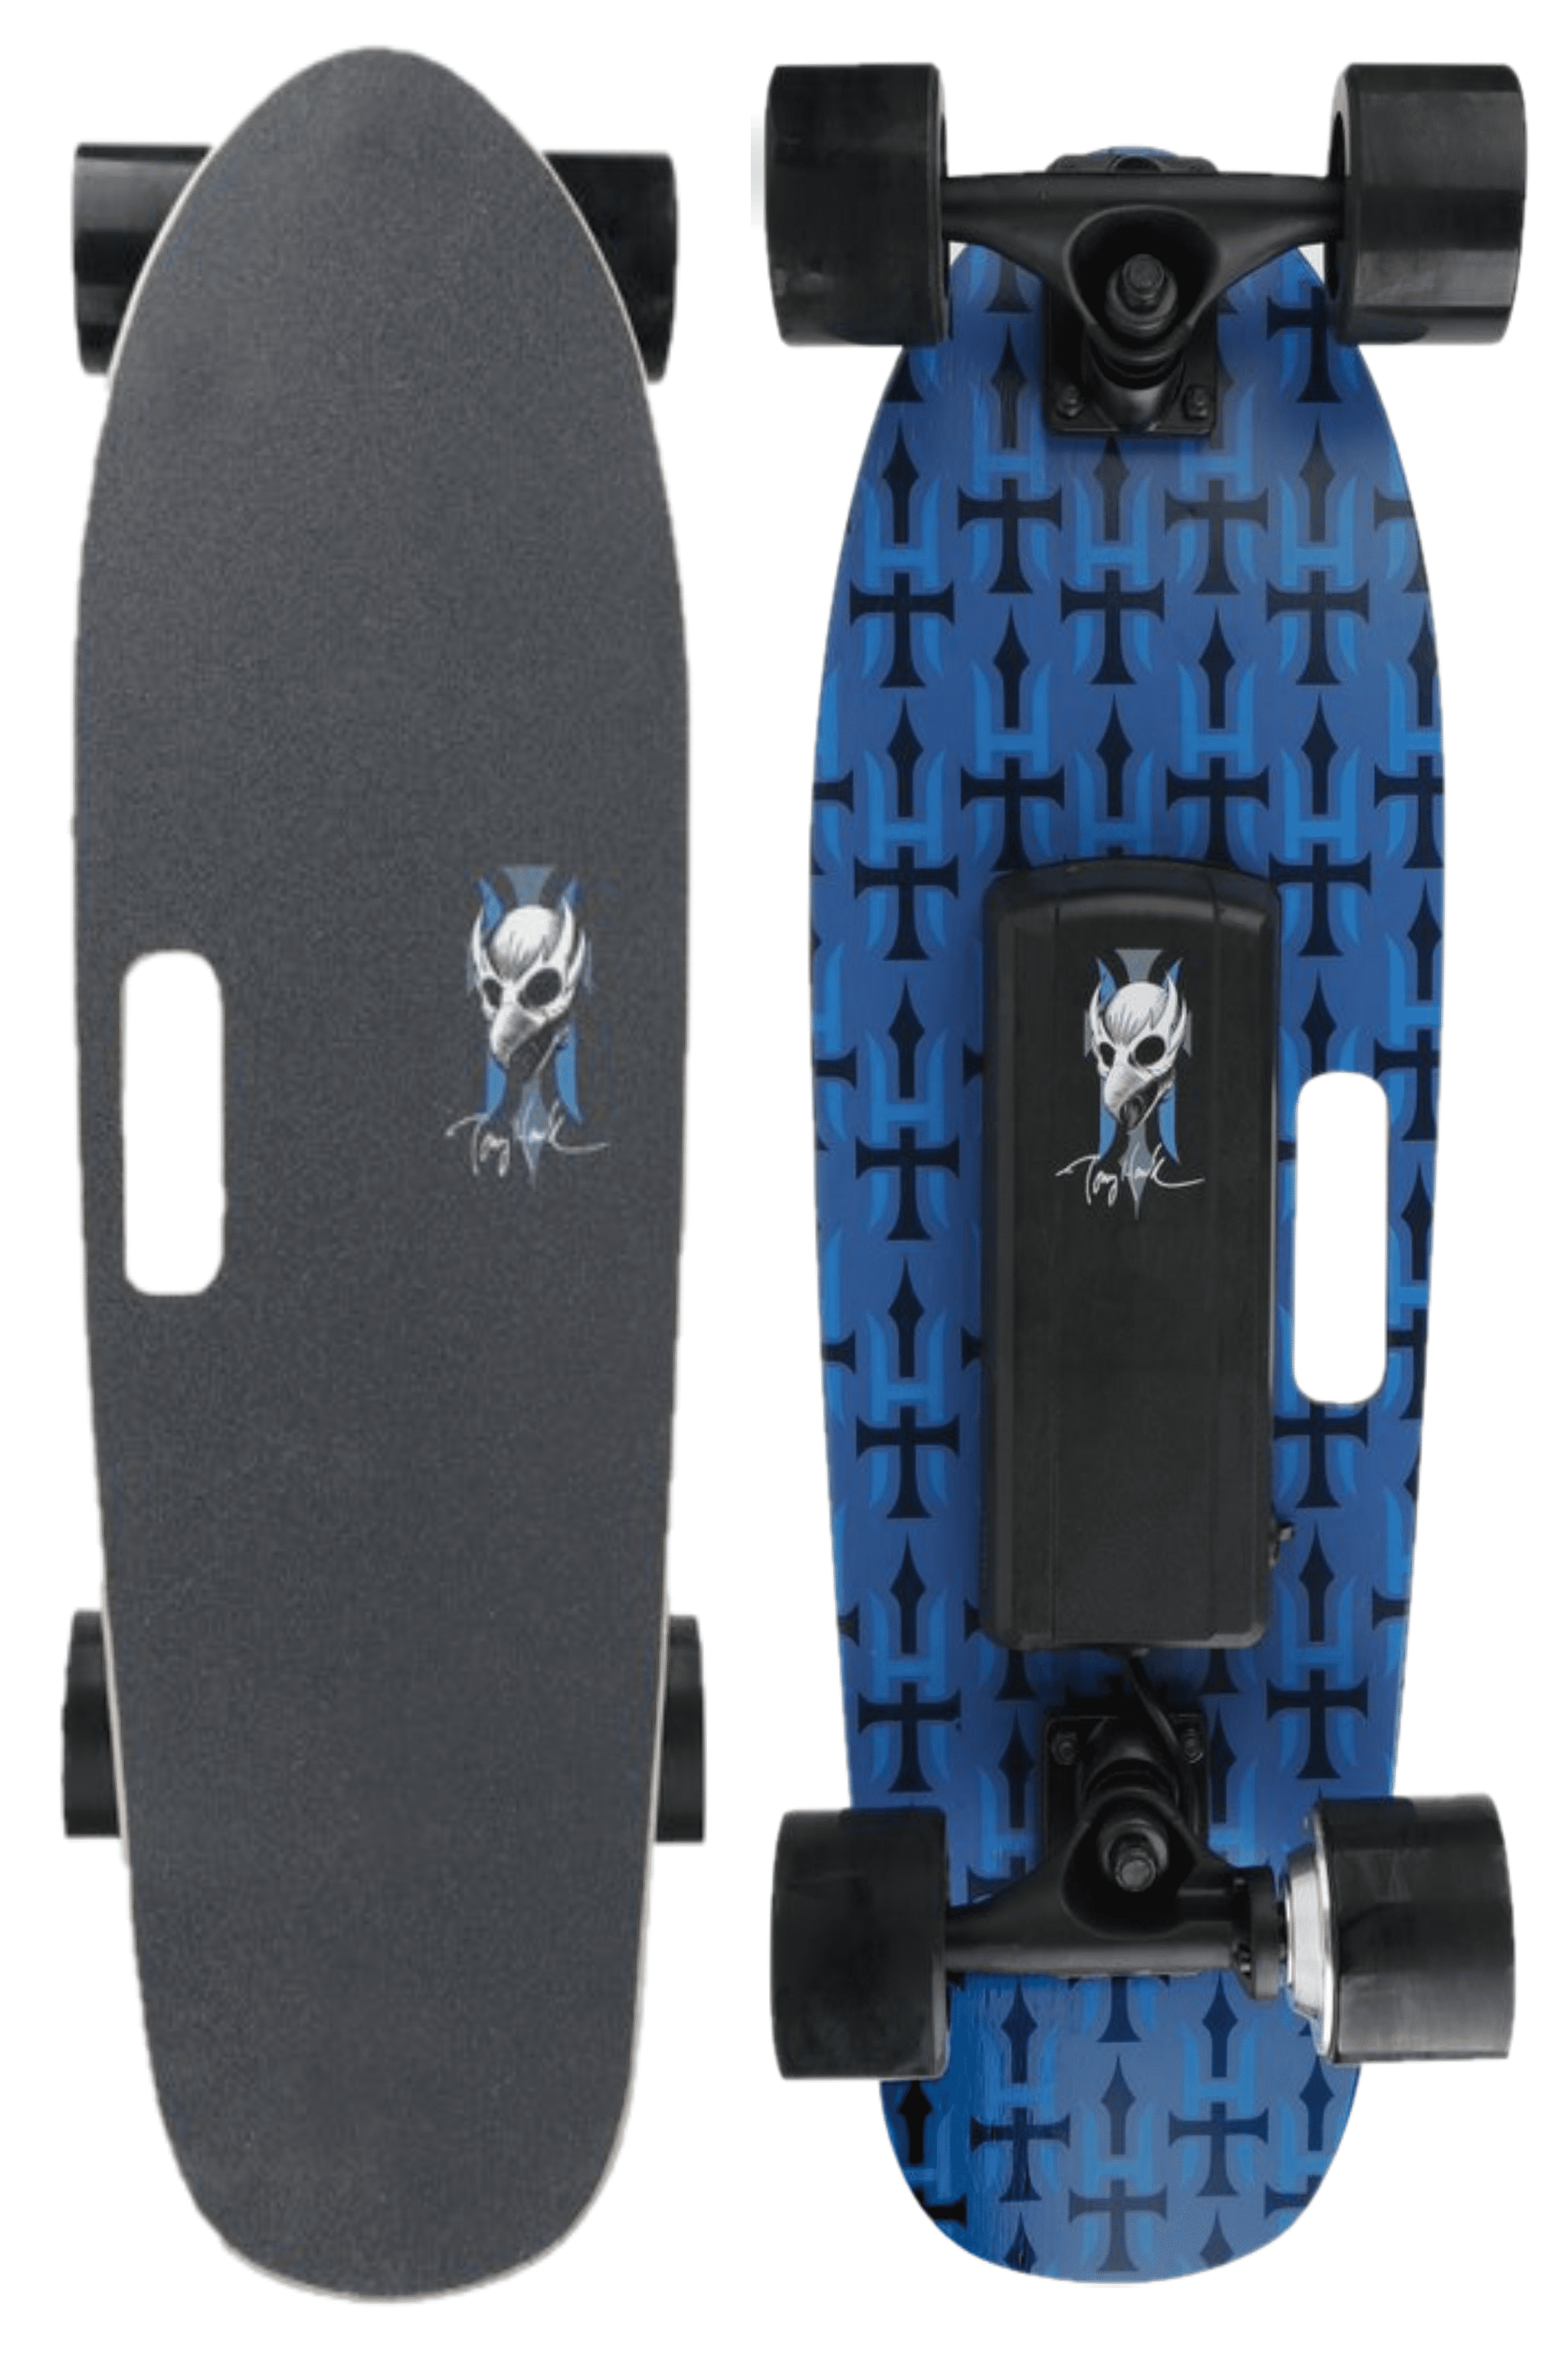 RORA Skateboards 31 x 8 Complete Skateboard for Beginners Kids Teens & Adults ABEC 7 95A